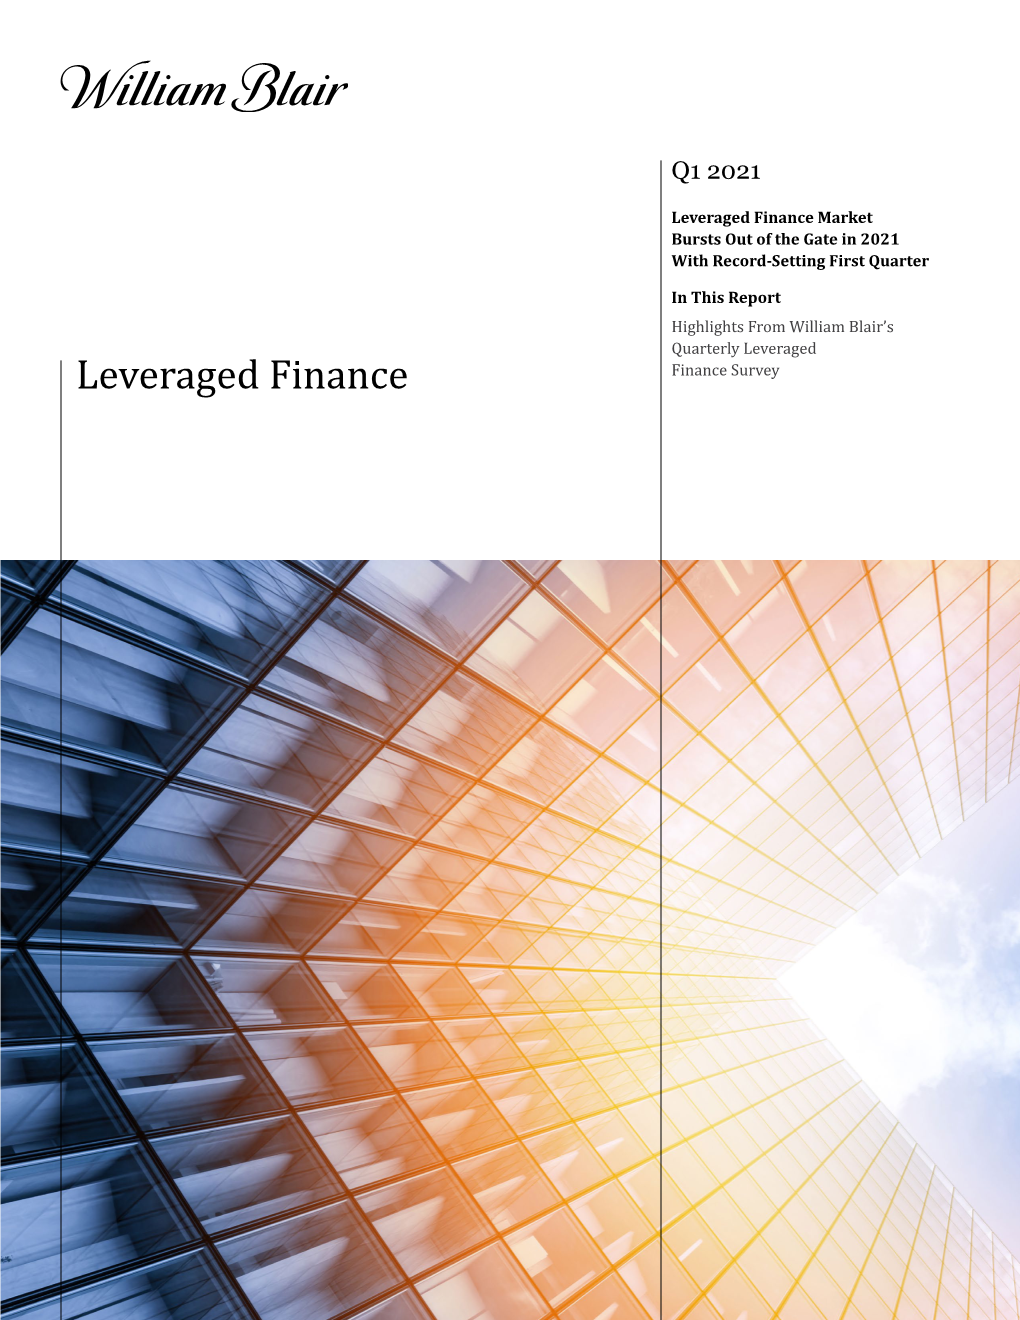 Leveraged Finance Market Bursts out of the Gate in 2021 with Record-Setting First Quarter